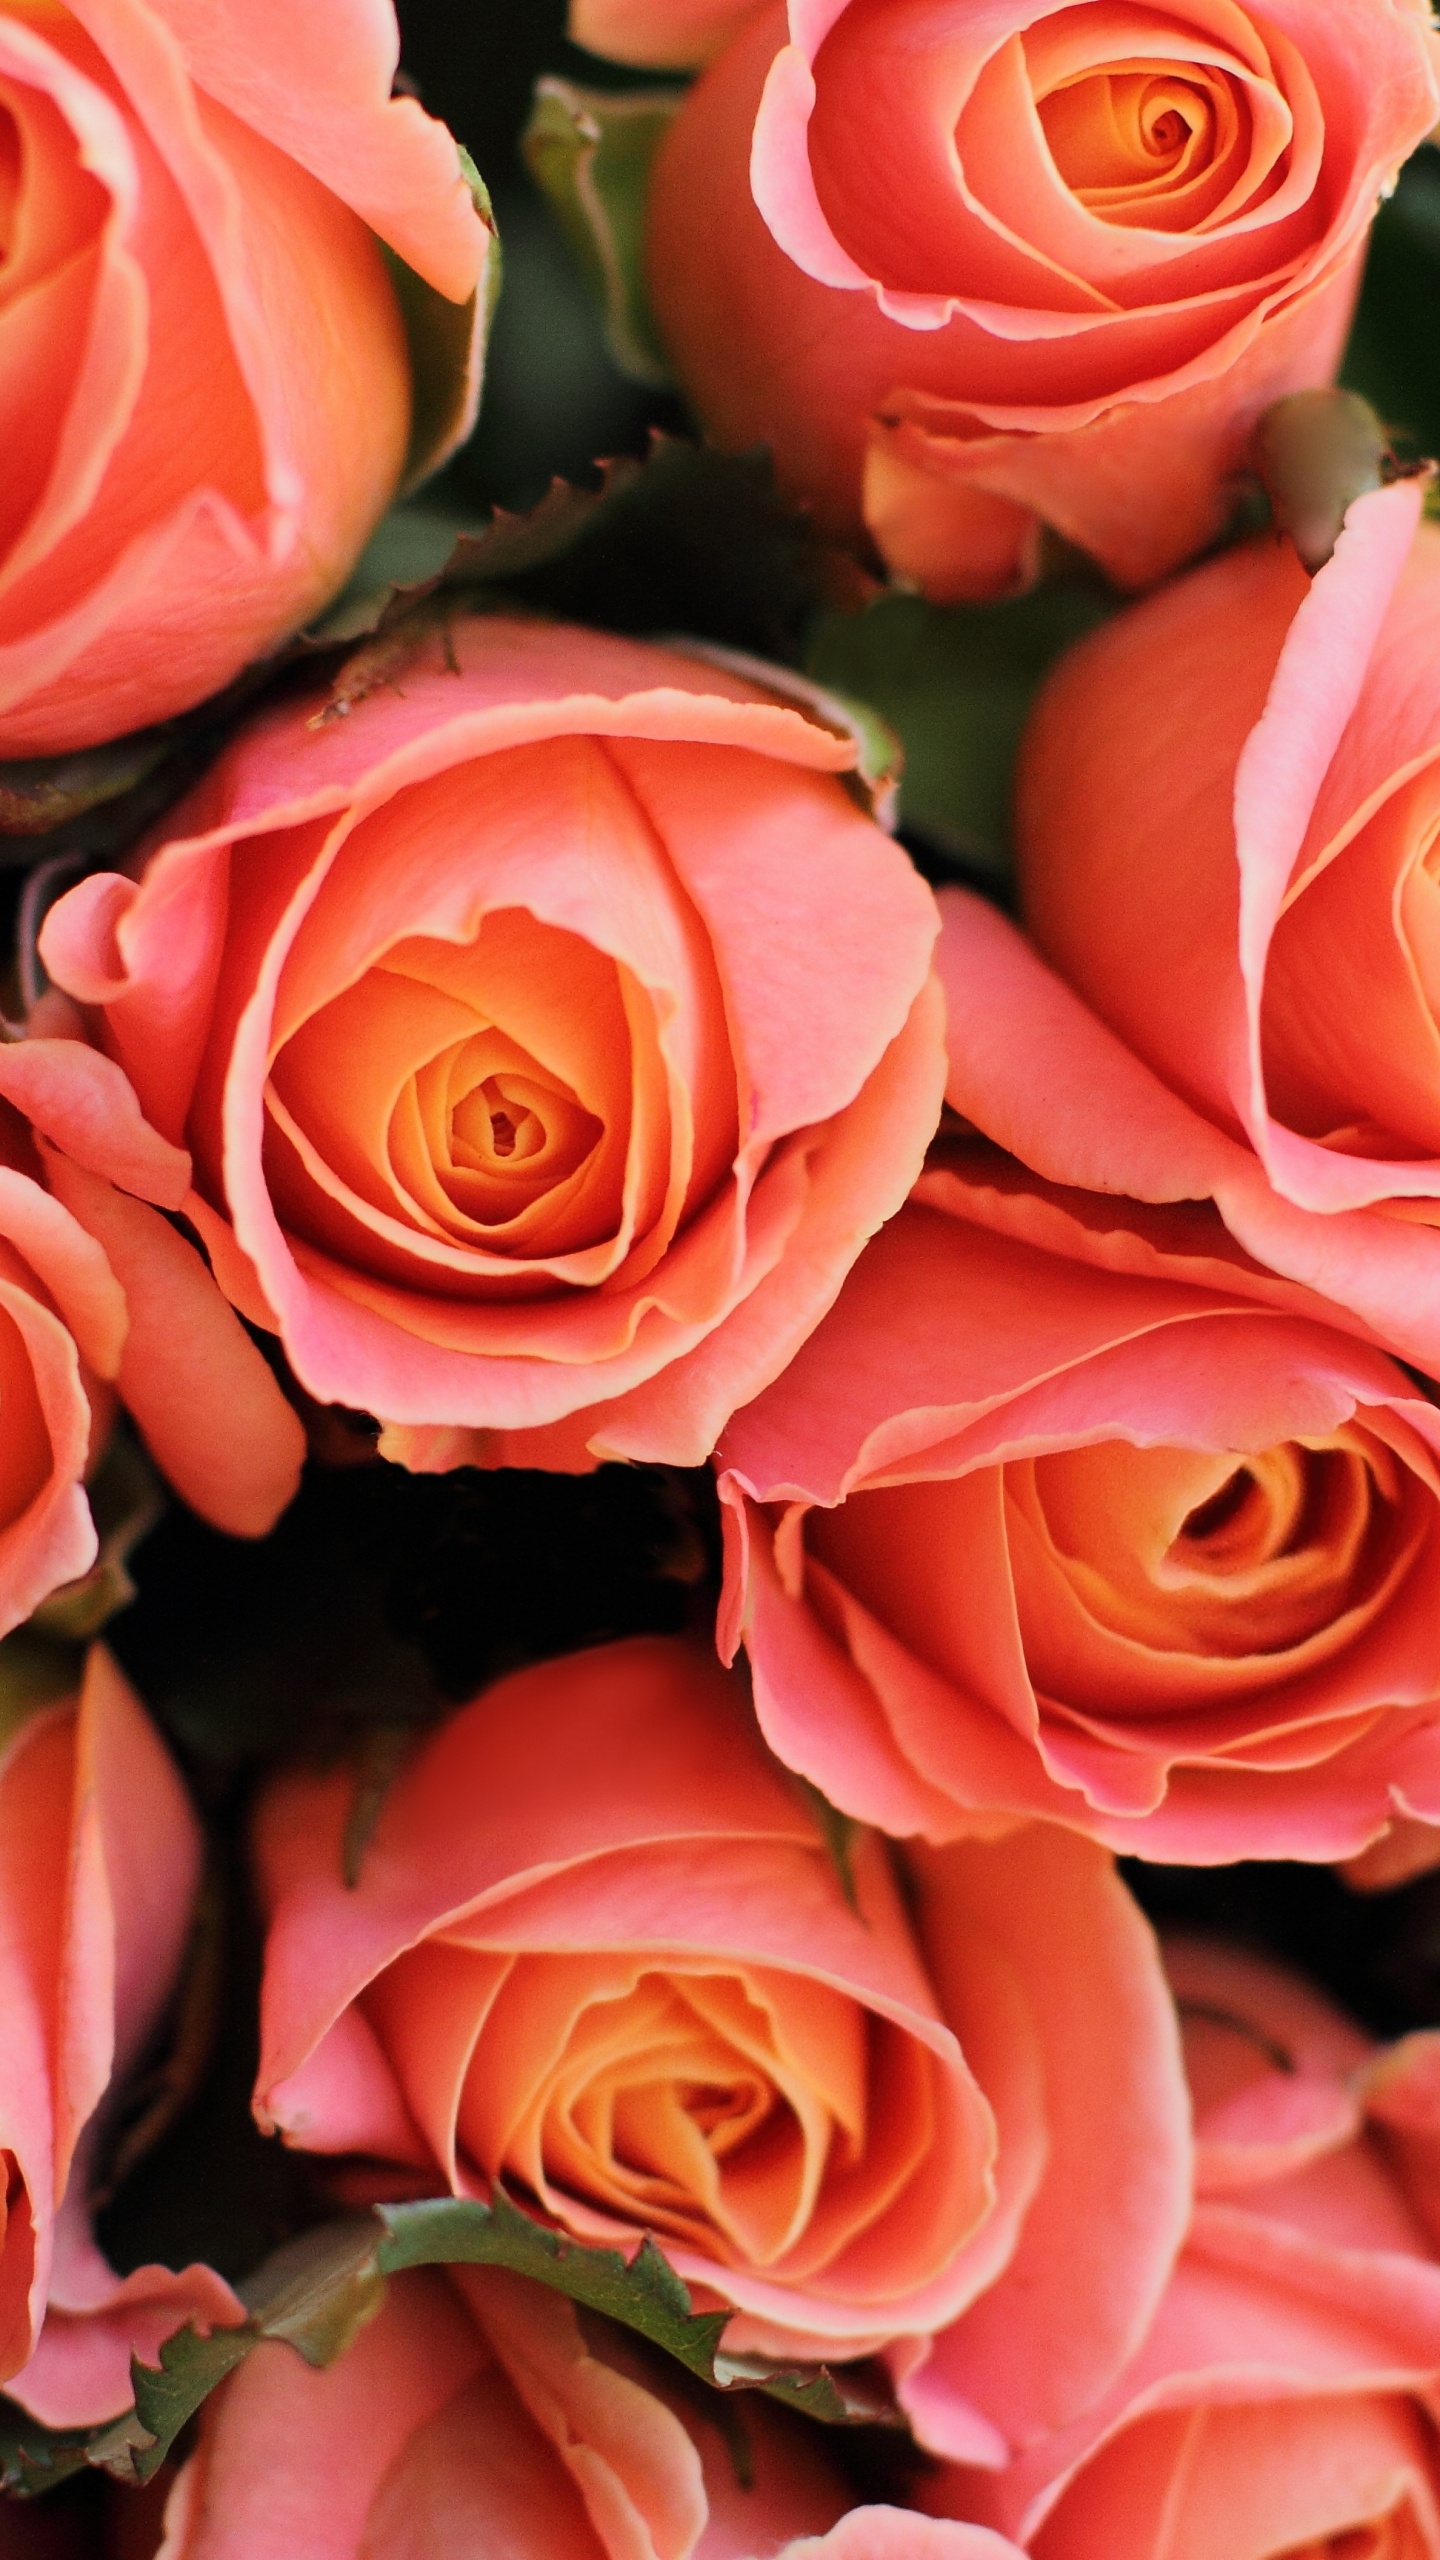 Pink Roses in Close up Photography. Wallpaper in 1440x2560 Resolution